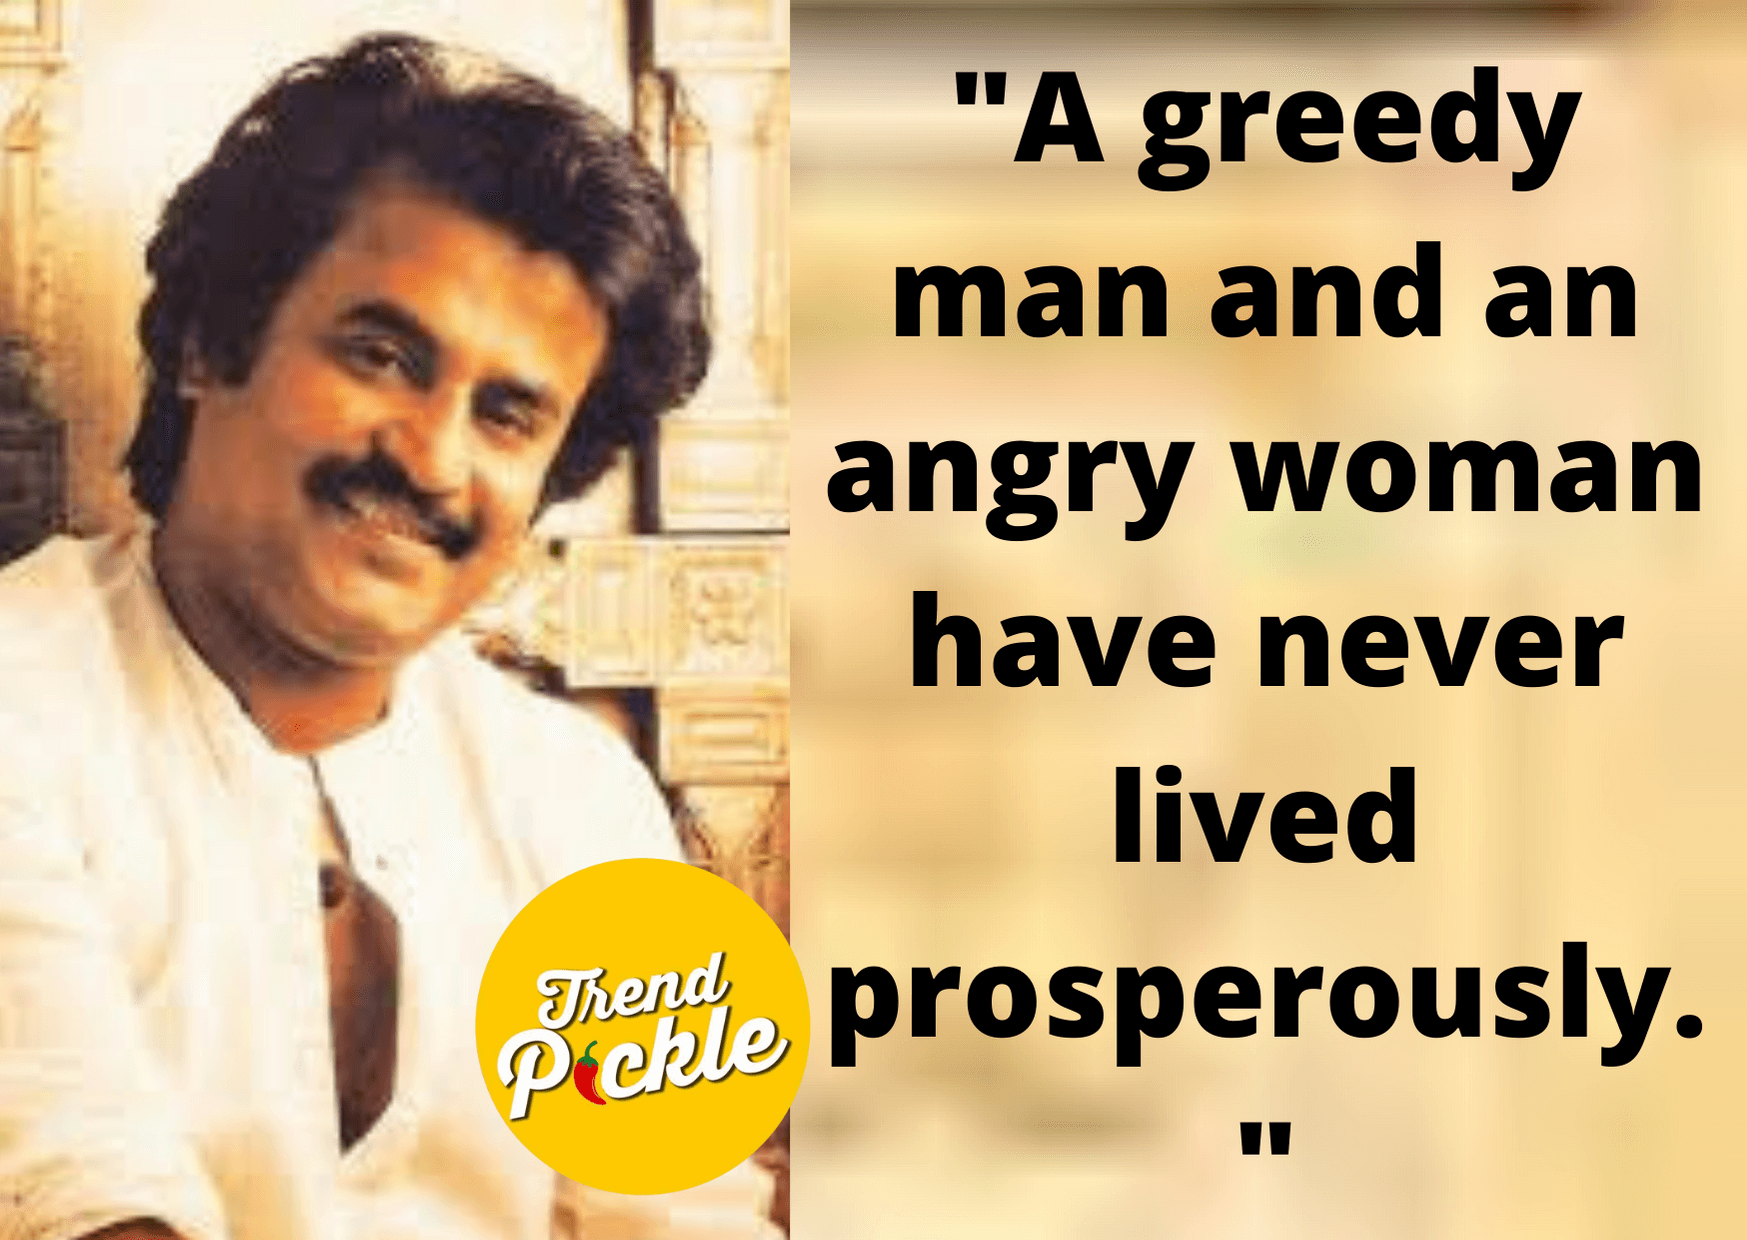 Quotes by Rajinikanth